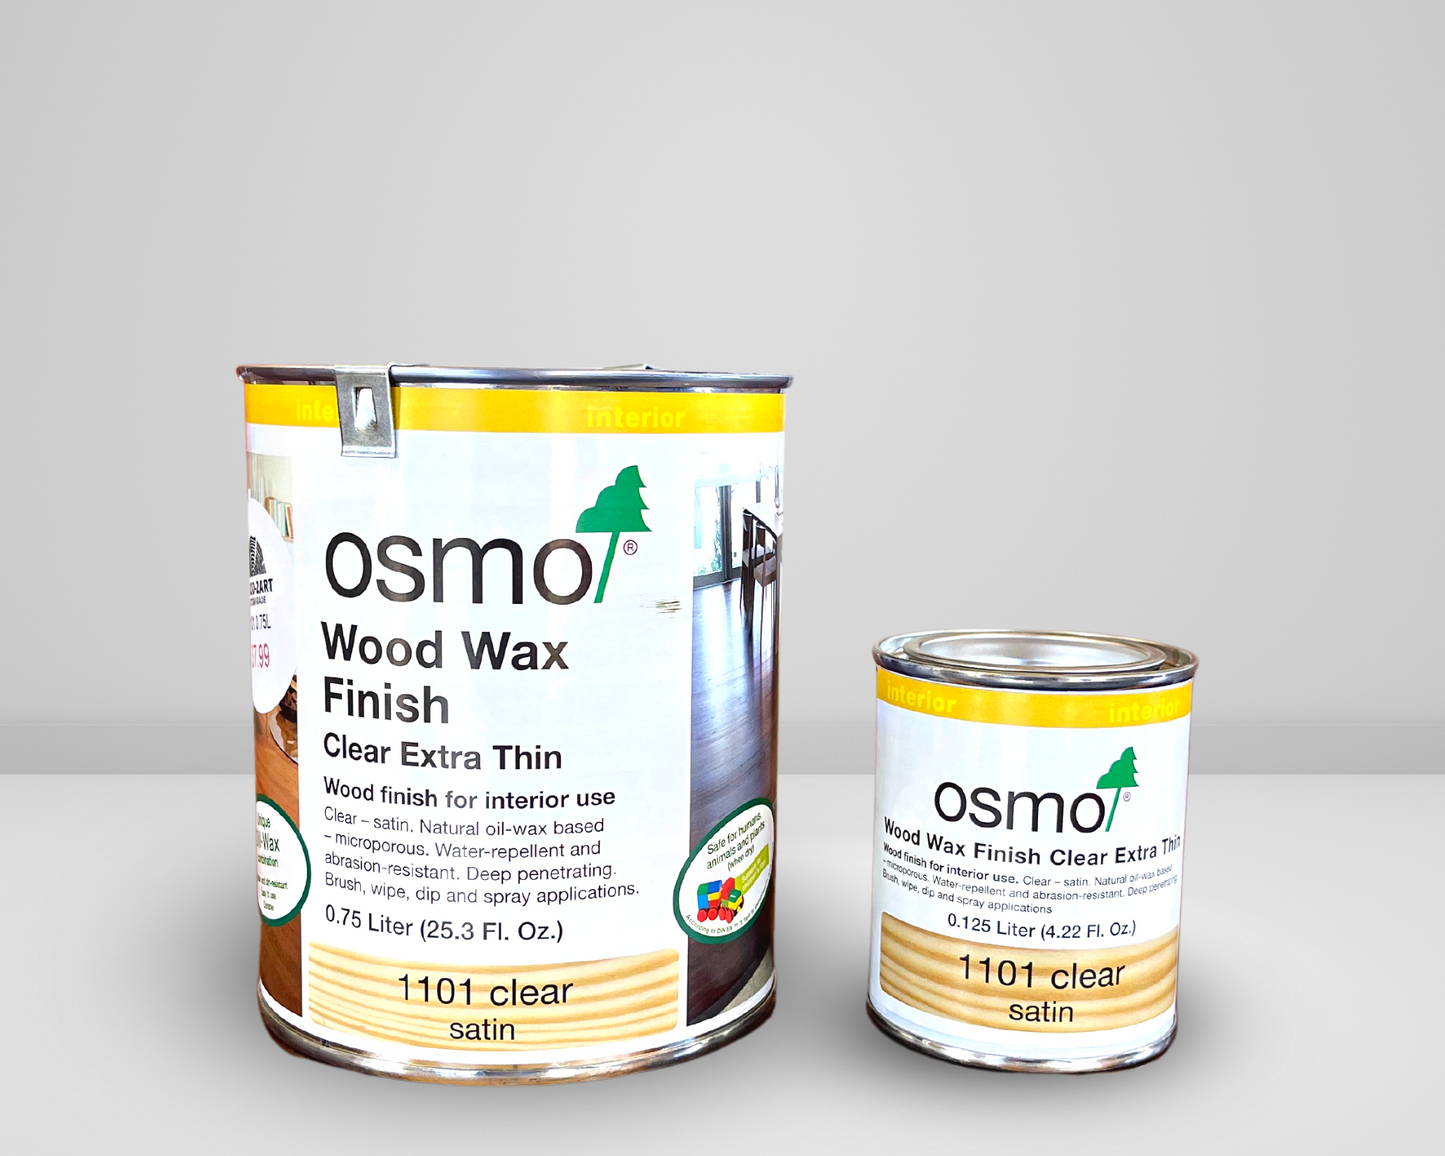 OSMO 1101 <br> Wood Wax Finish <br> Clear Extra Thin <br> Clear Satin